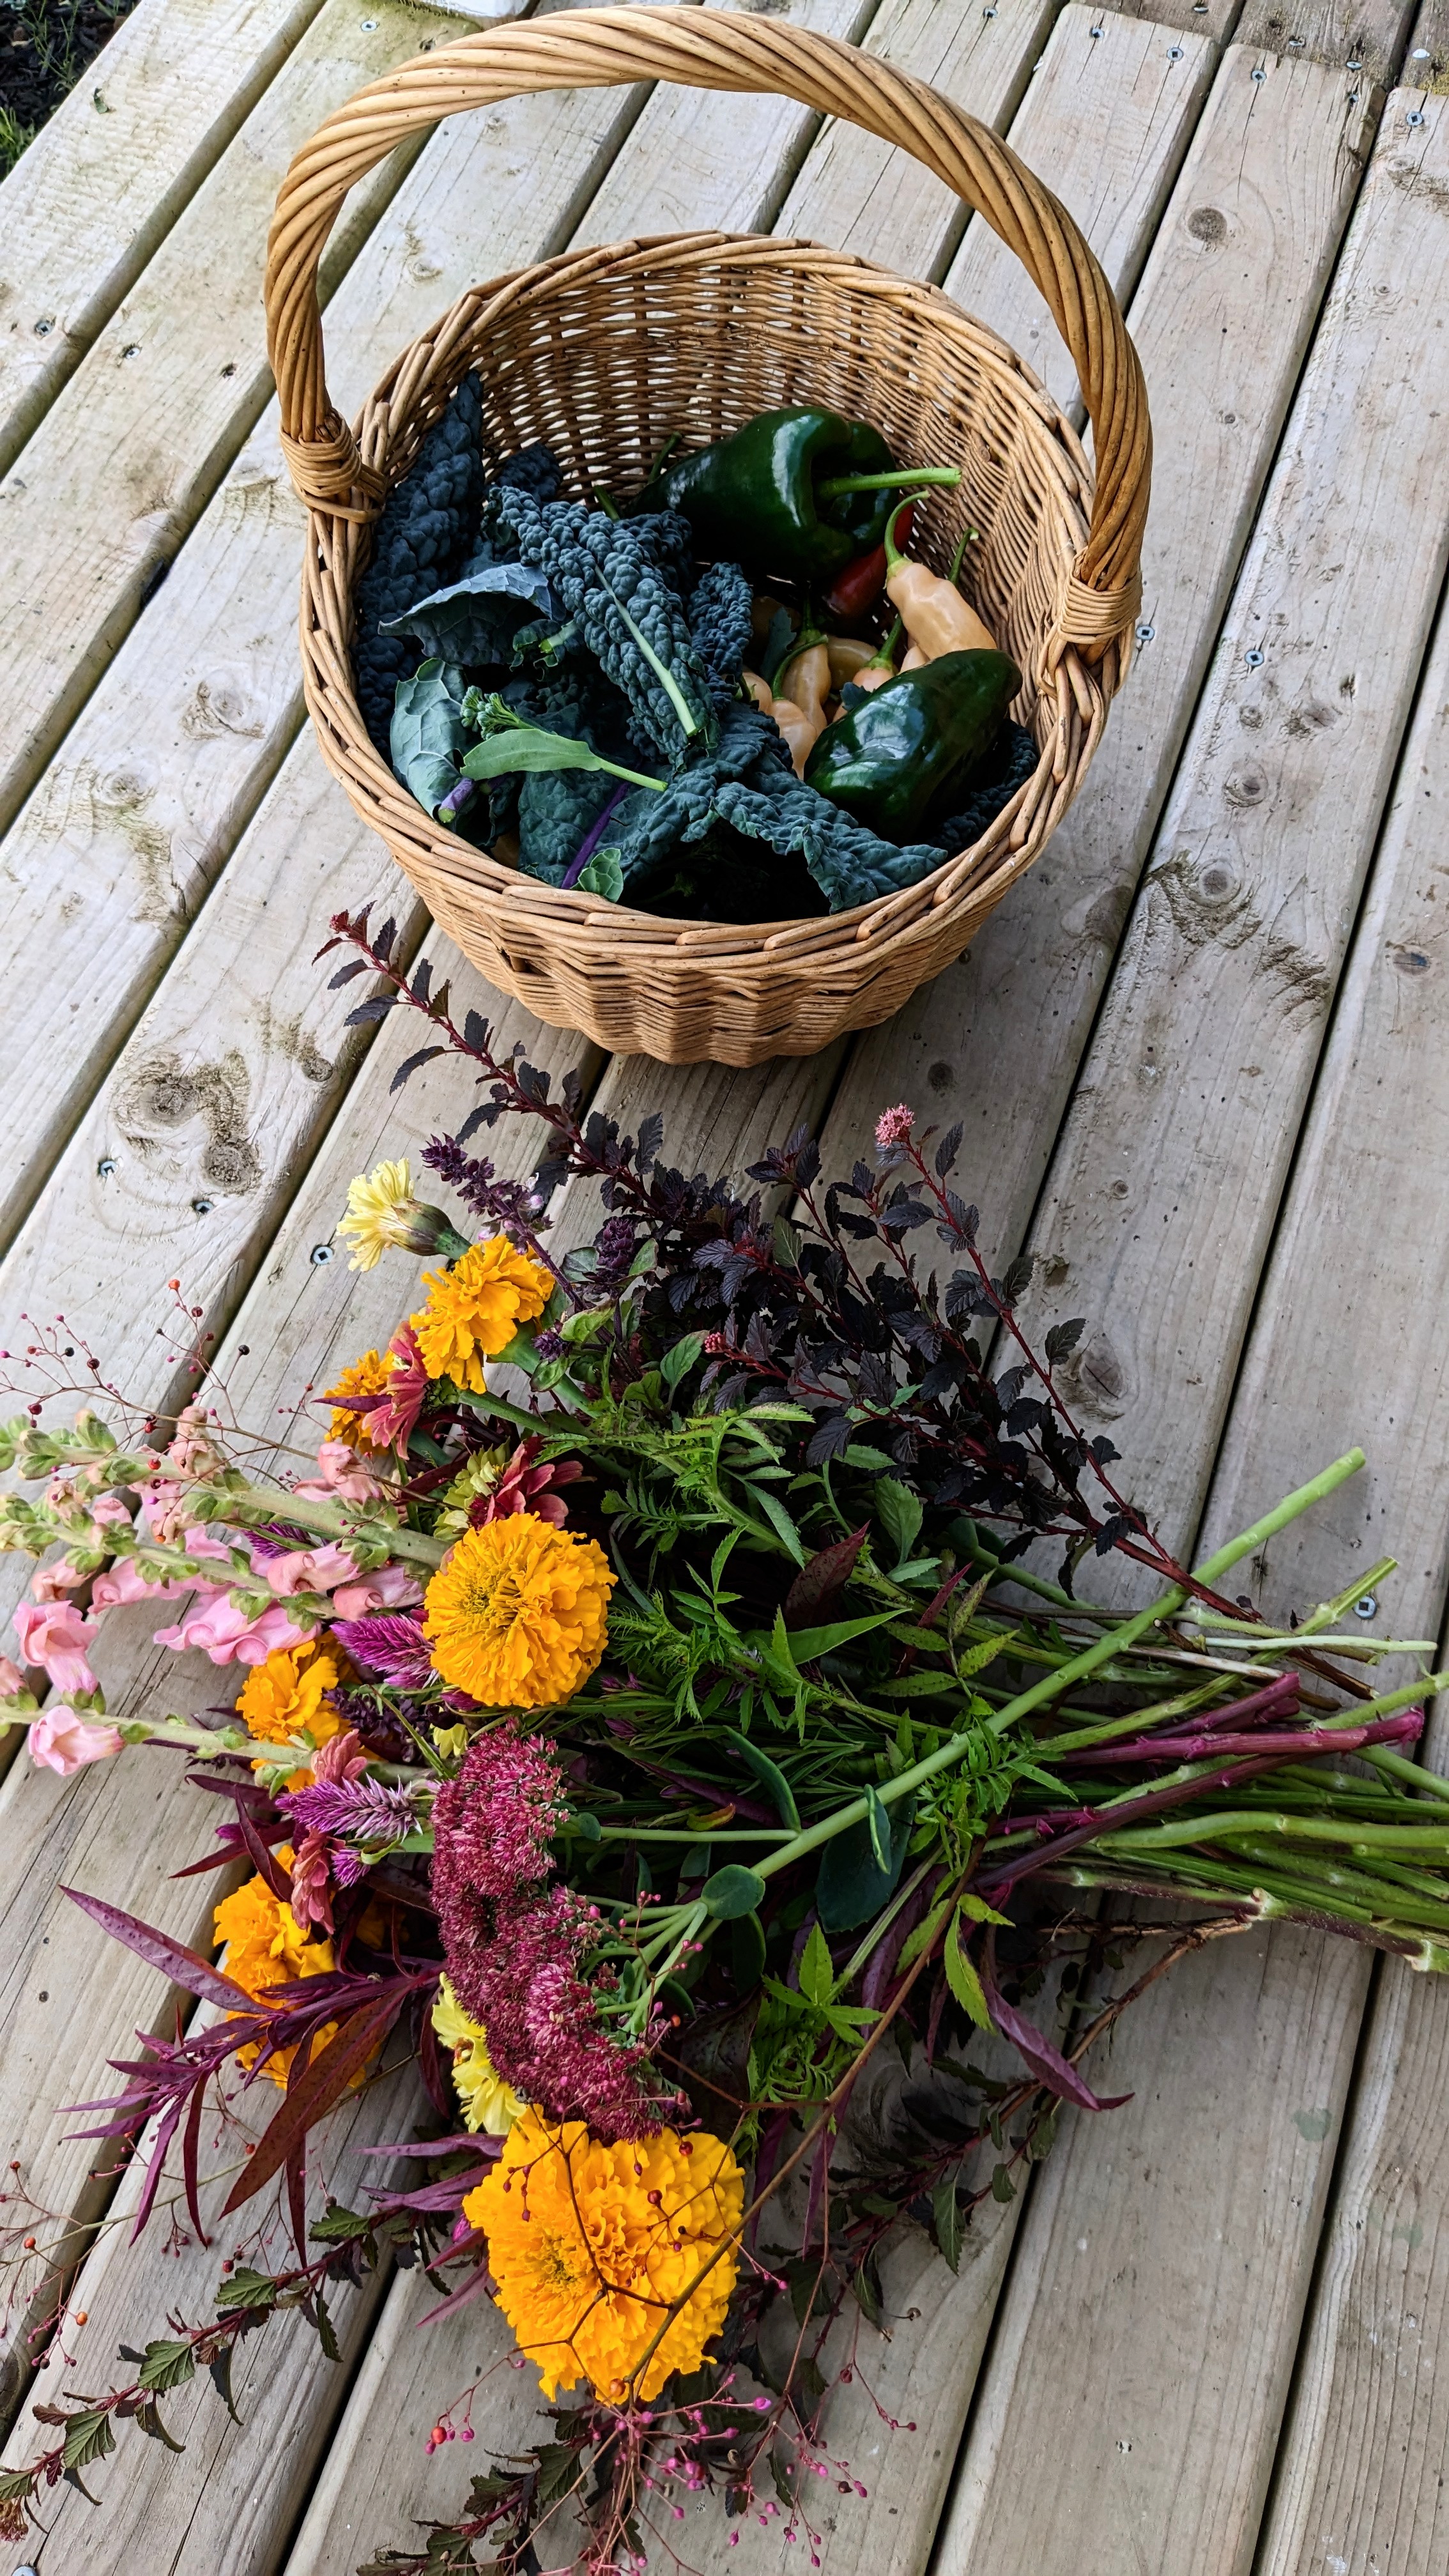 Basket of peppers and kale and flowers.